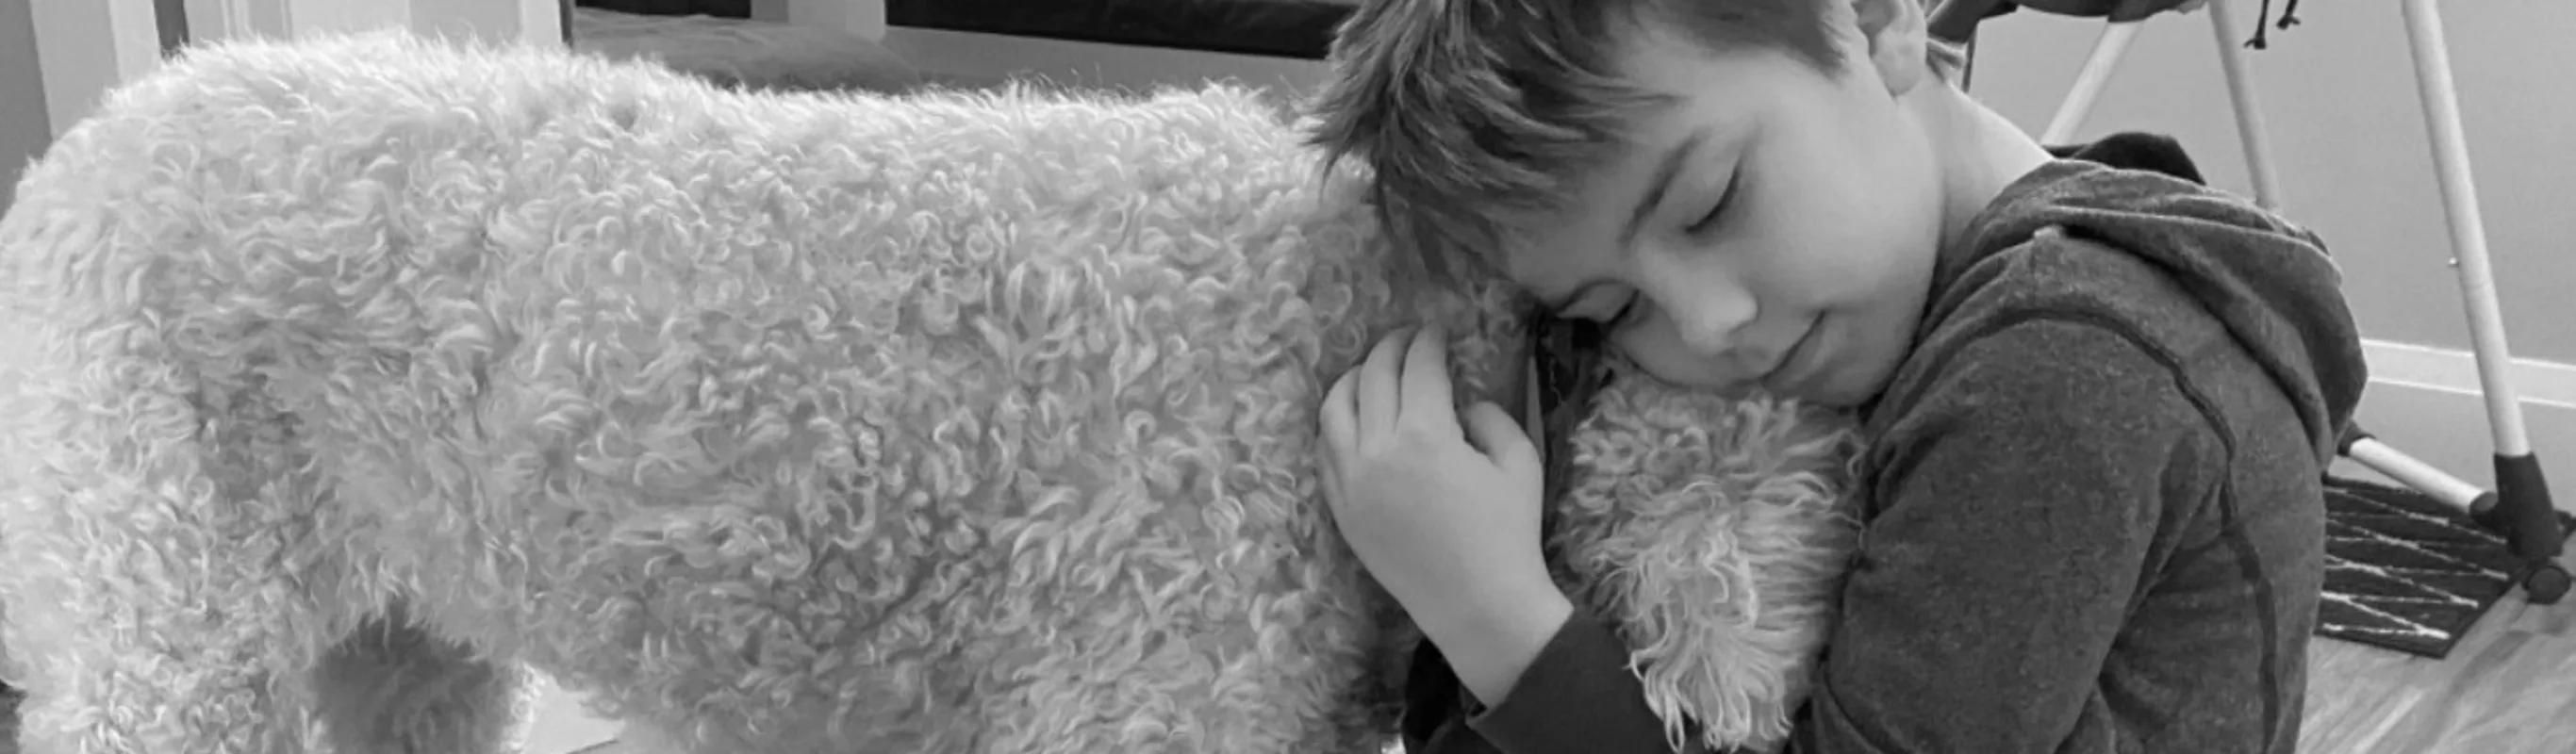 Black and white photo of a child hugging a dog